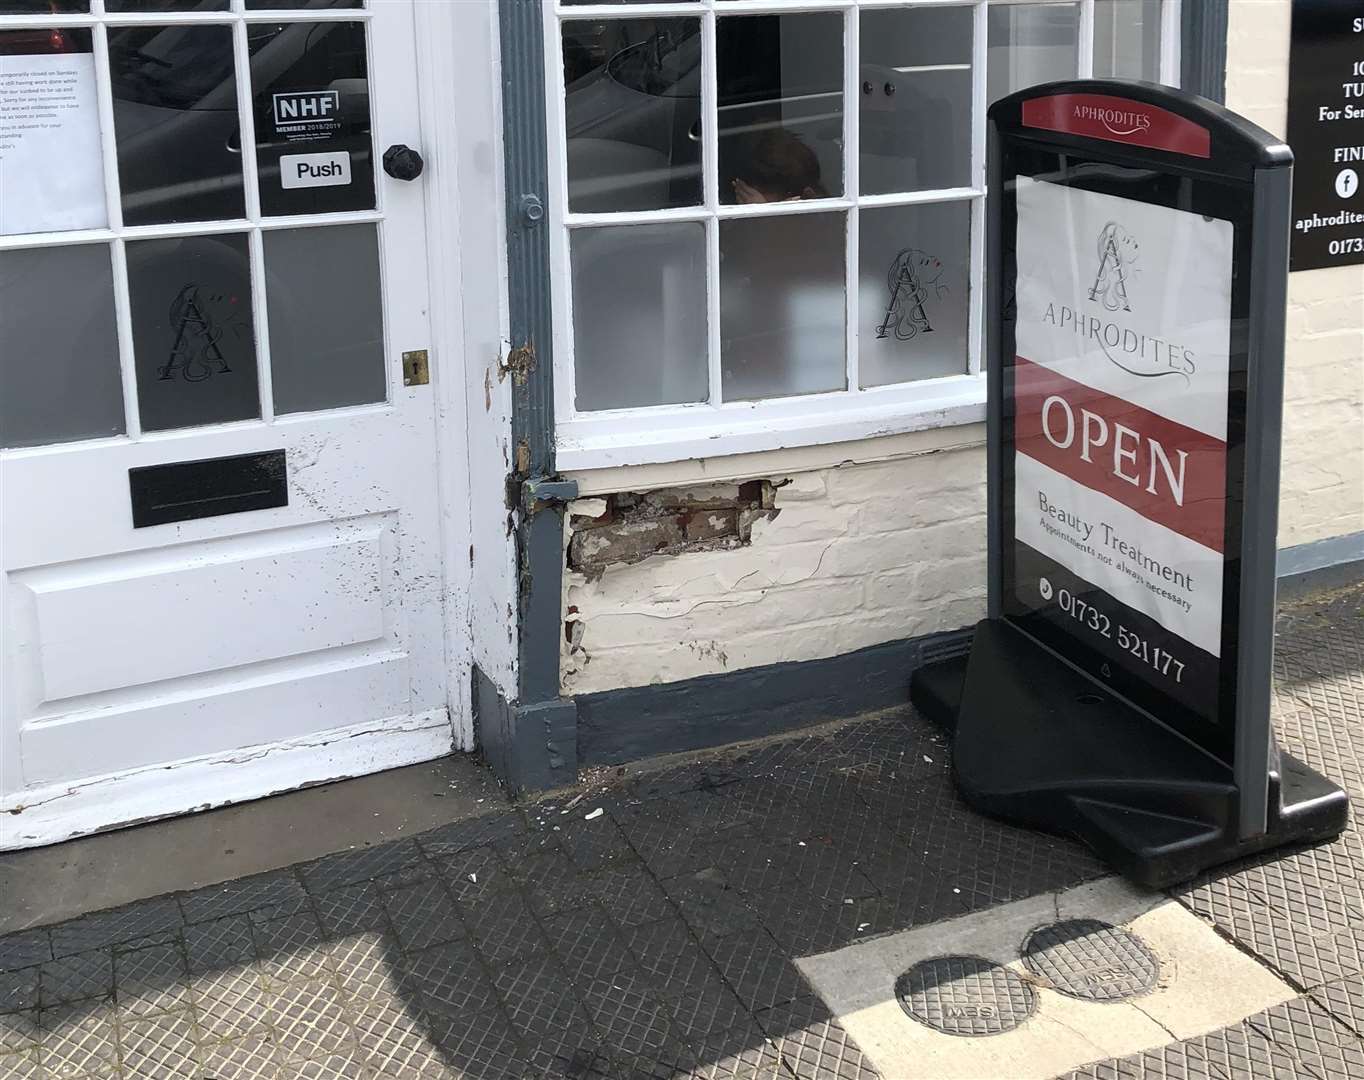 Damage was caused to the front of Aphrodite's in West Malling High Street (1495909)